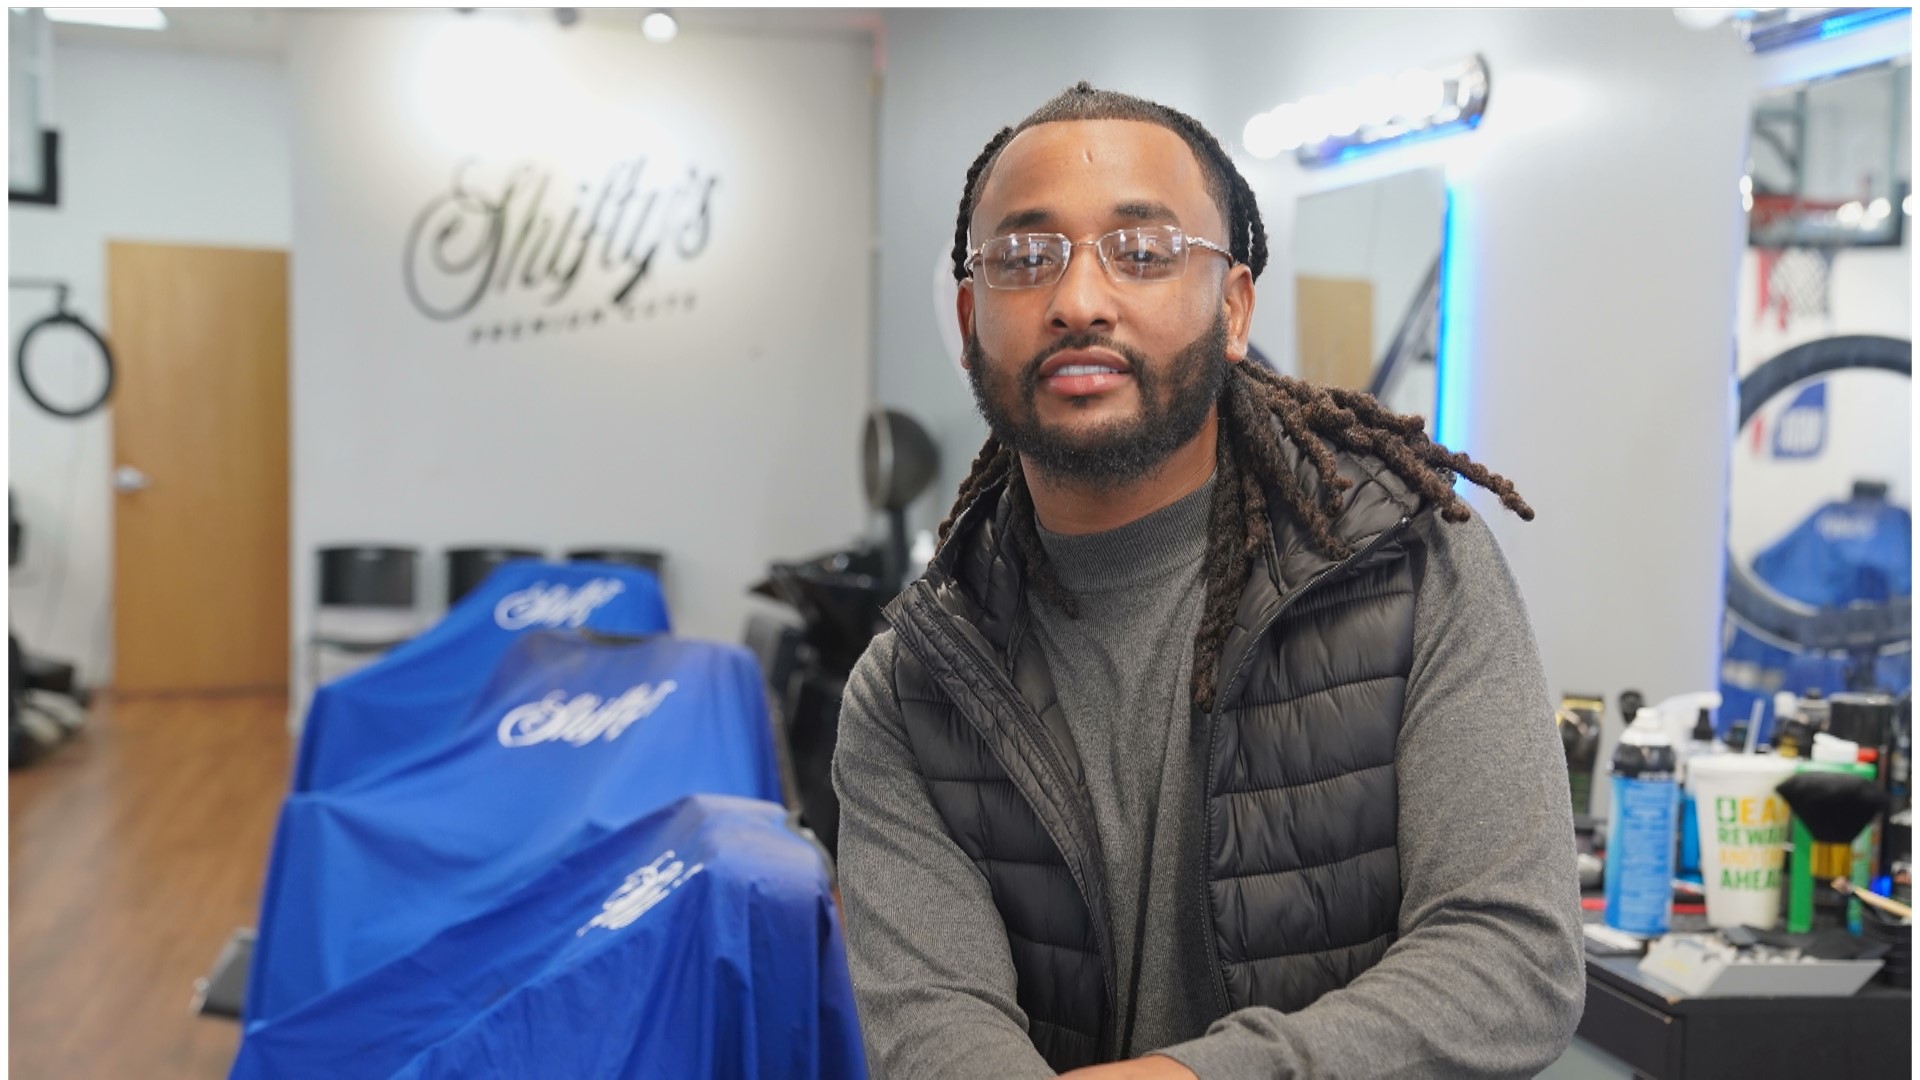 Nathan Sheferaw owned Shifty's Premium Cuts in Mounds View and had plans to open a barber school later this year.